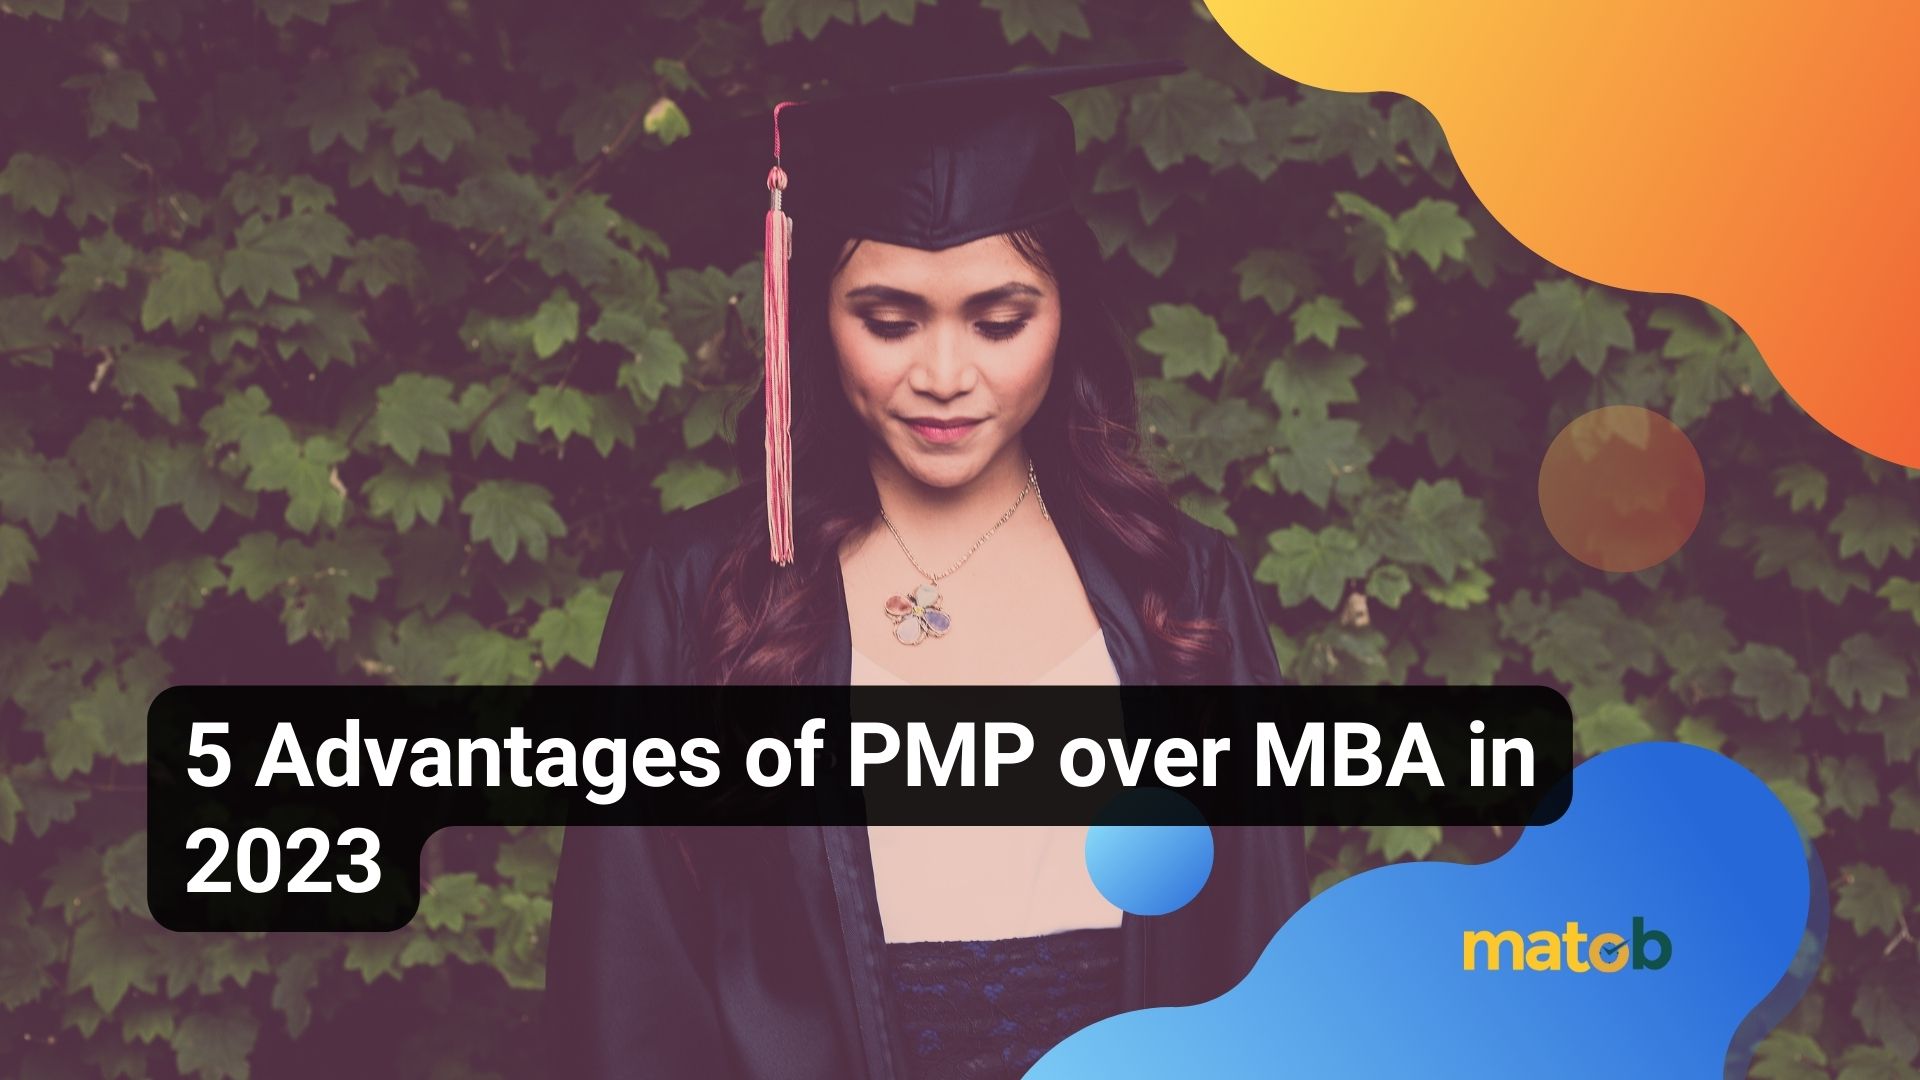 5 Advantages of PMP over MBA in 2023